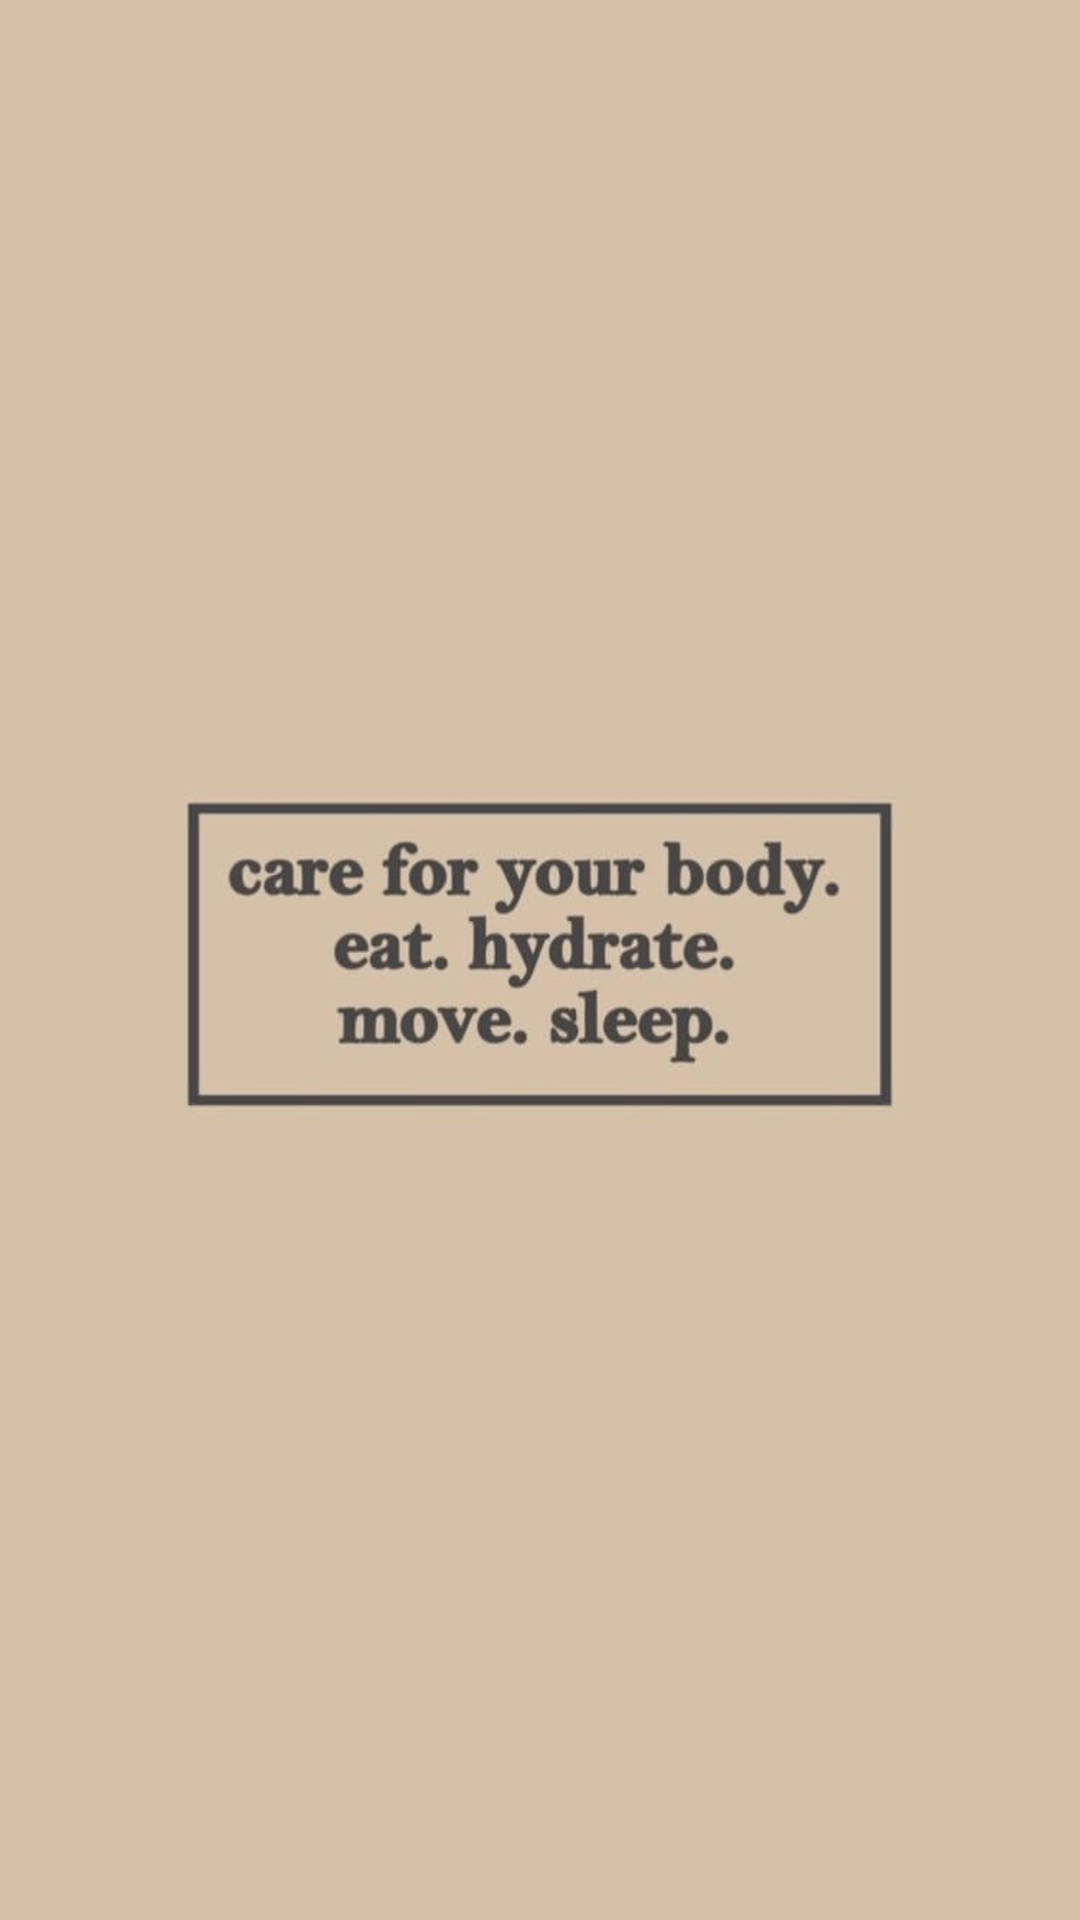 Aesthetic Beige Self-care Quote Wallpaper